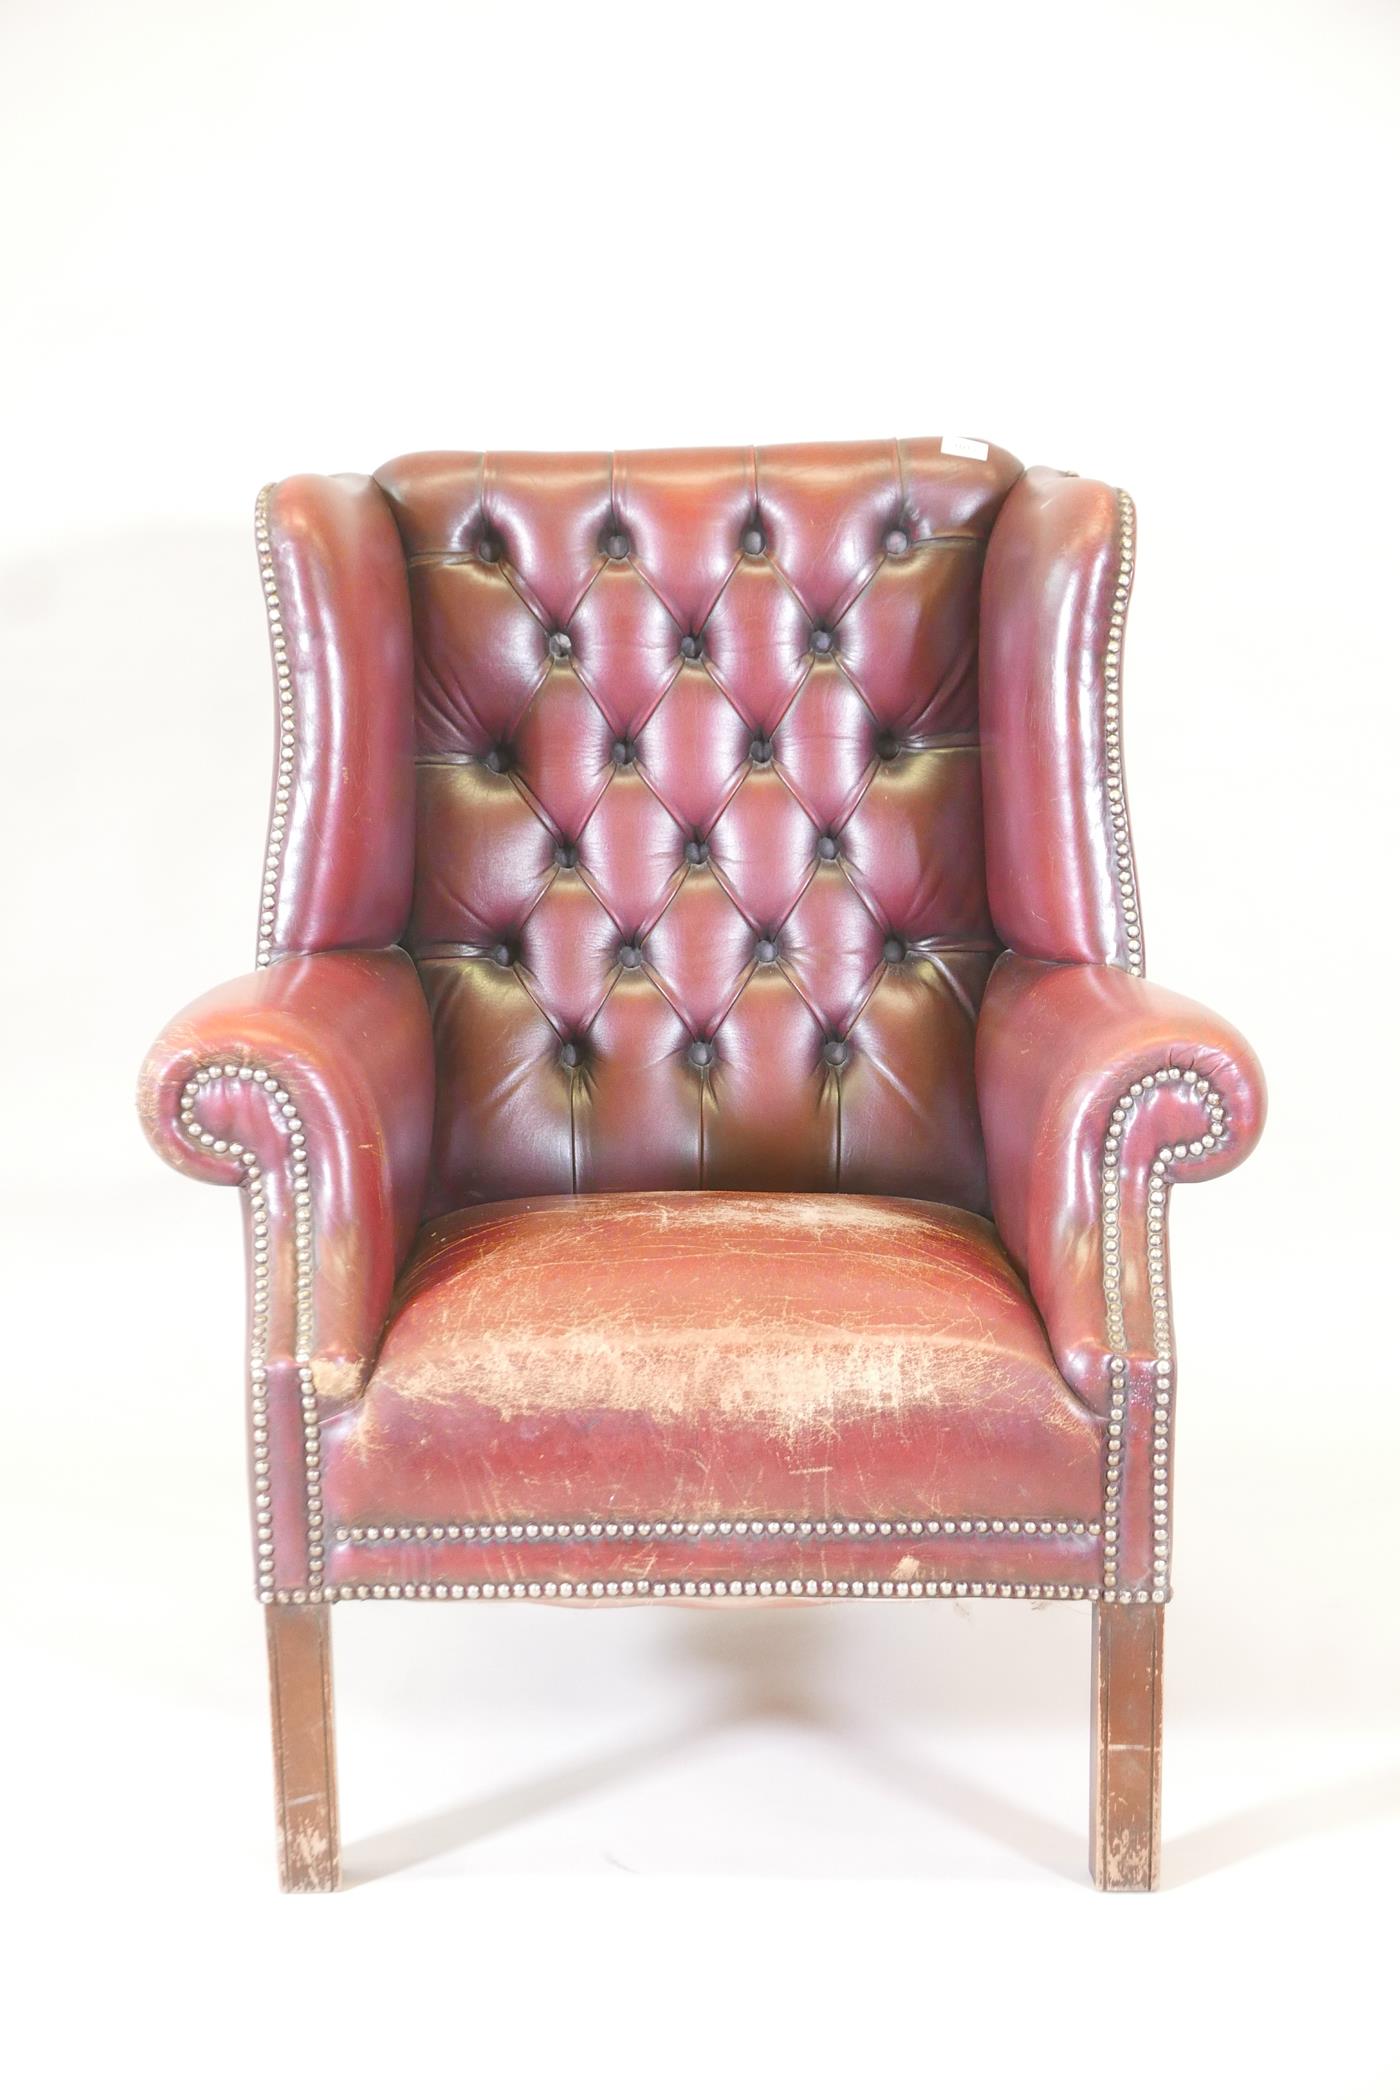 A C19th buttoned wing back armchair in red leather - Image 2 of 3